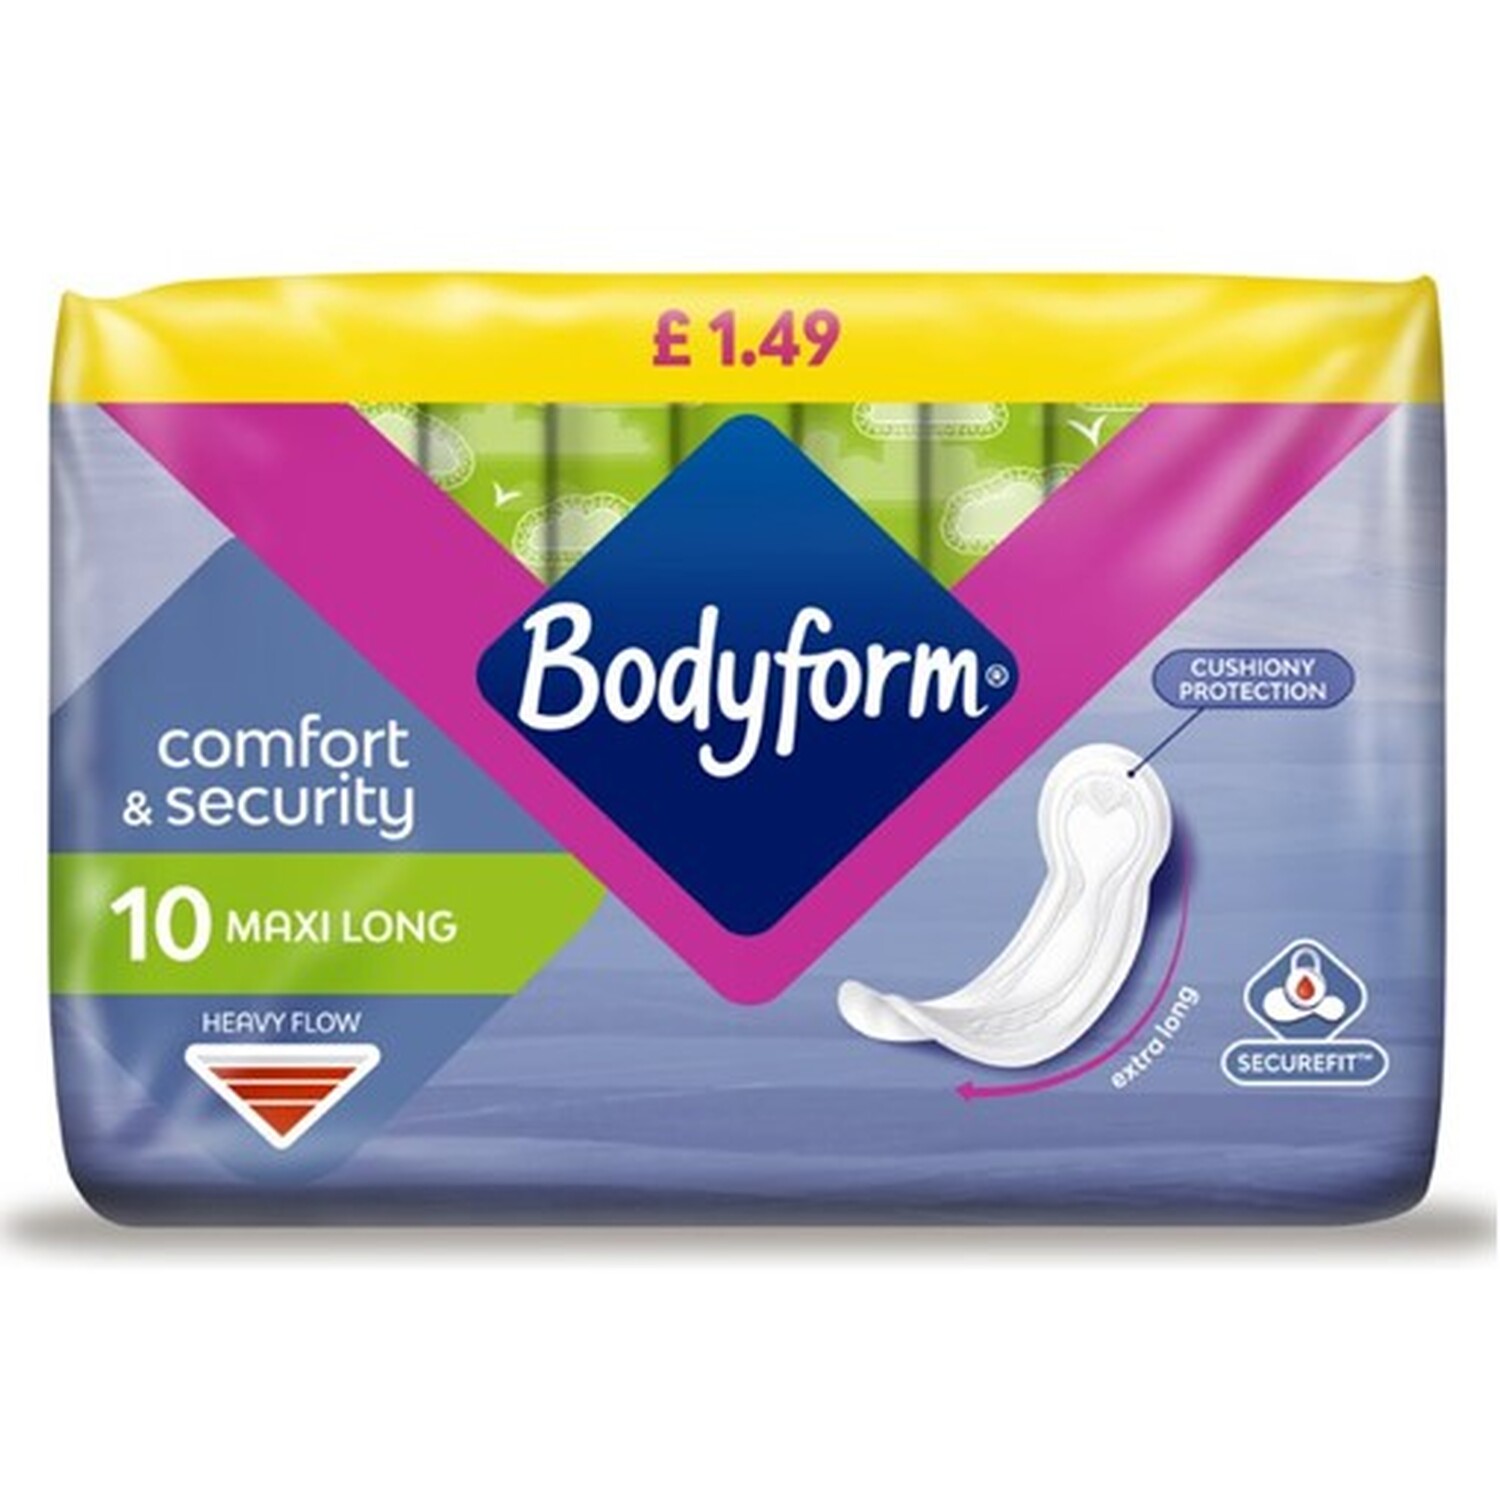 Pack of 10 Bodyform Maxi Long Pads Image